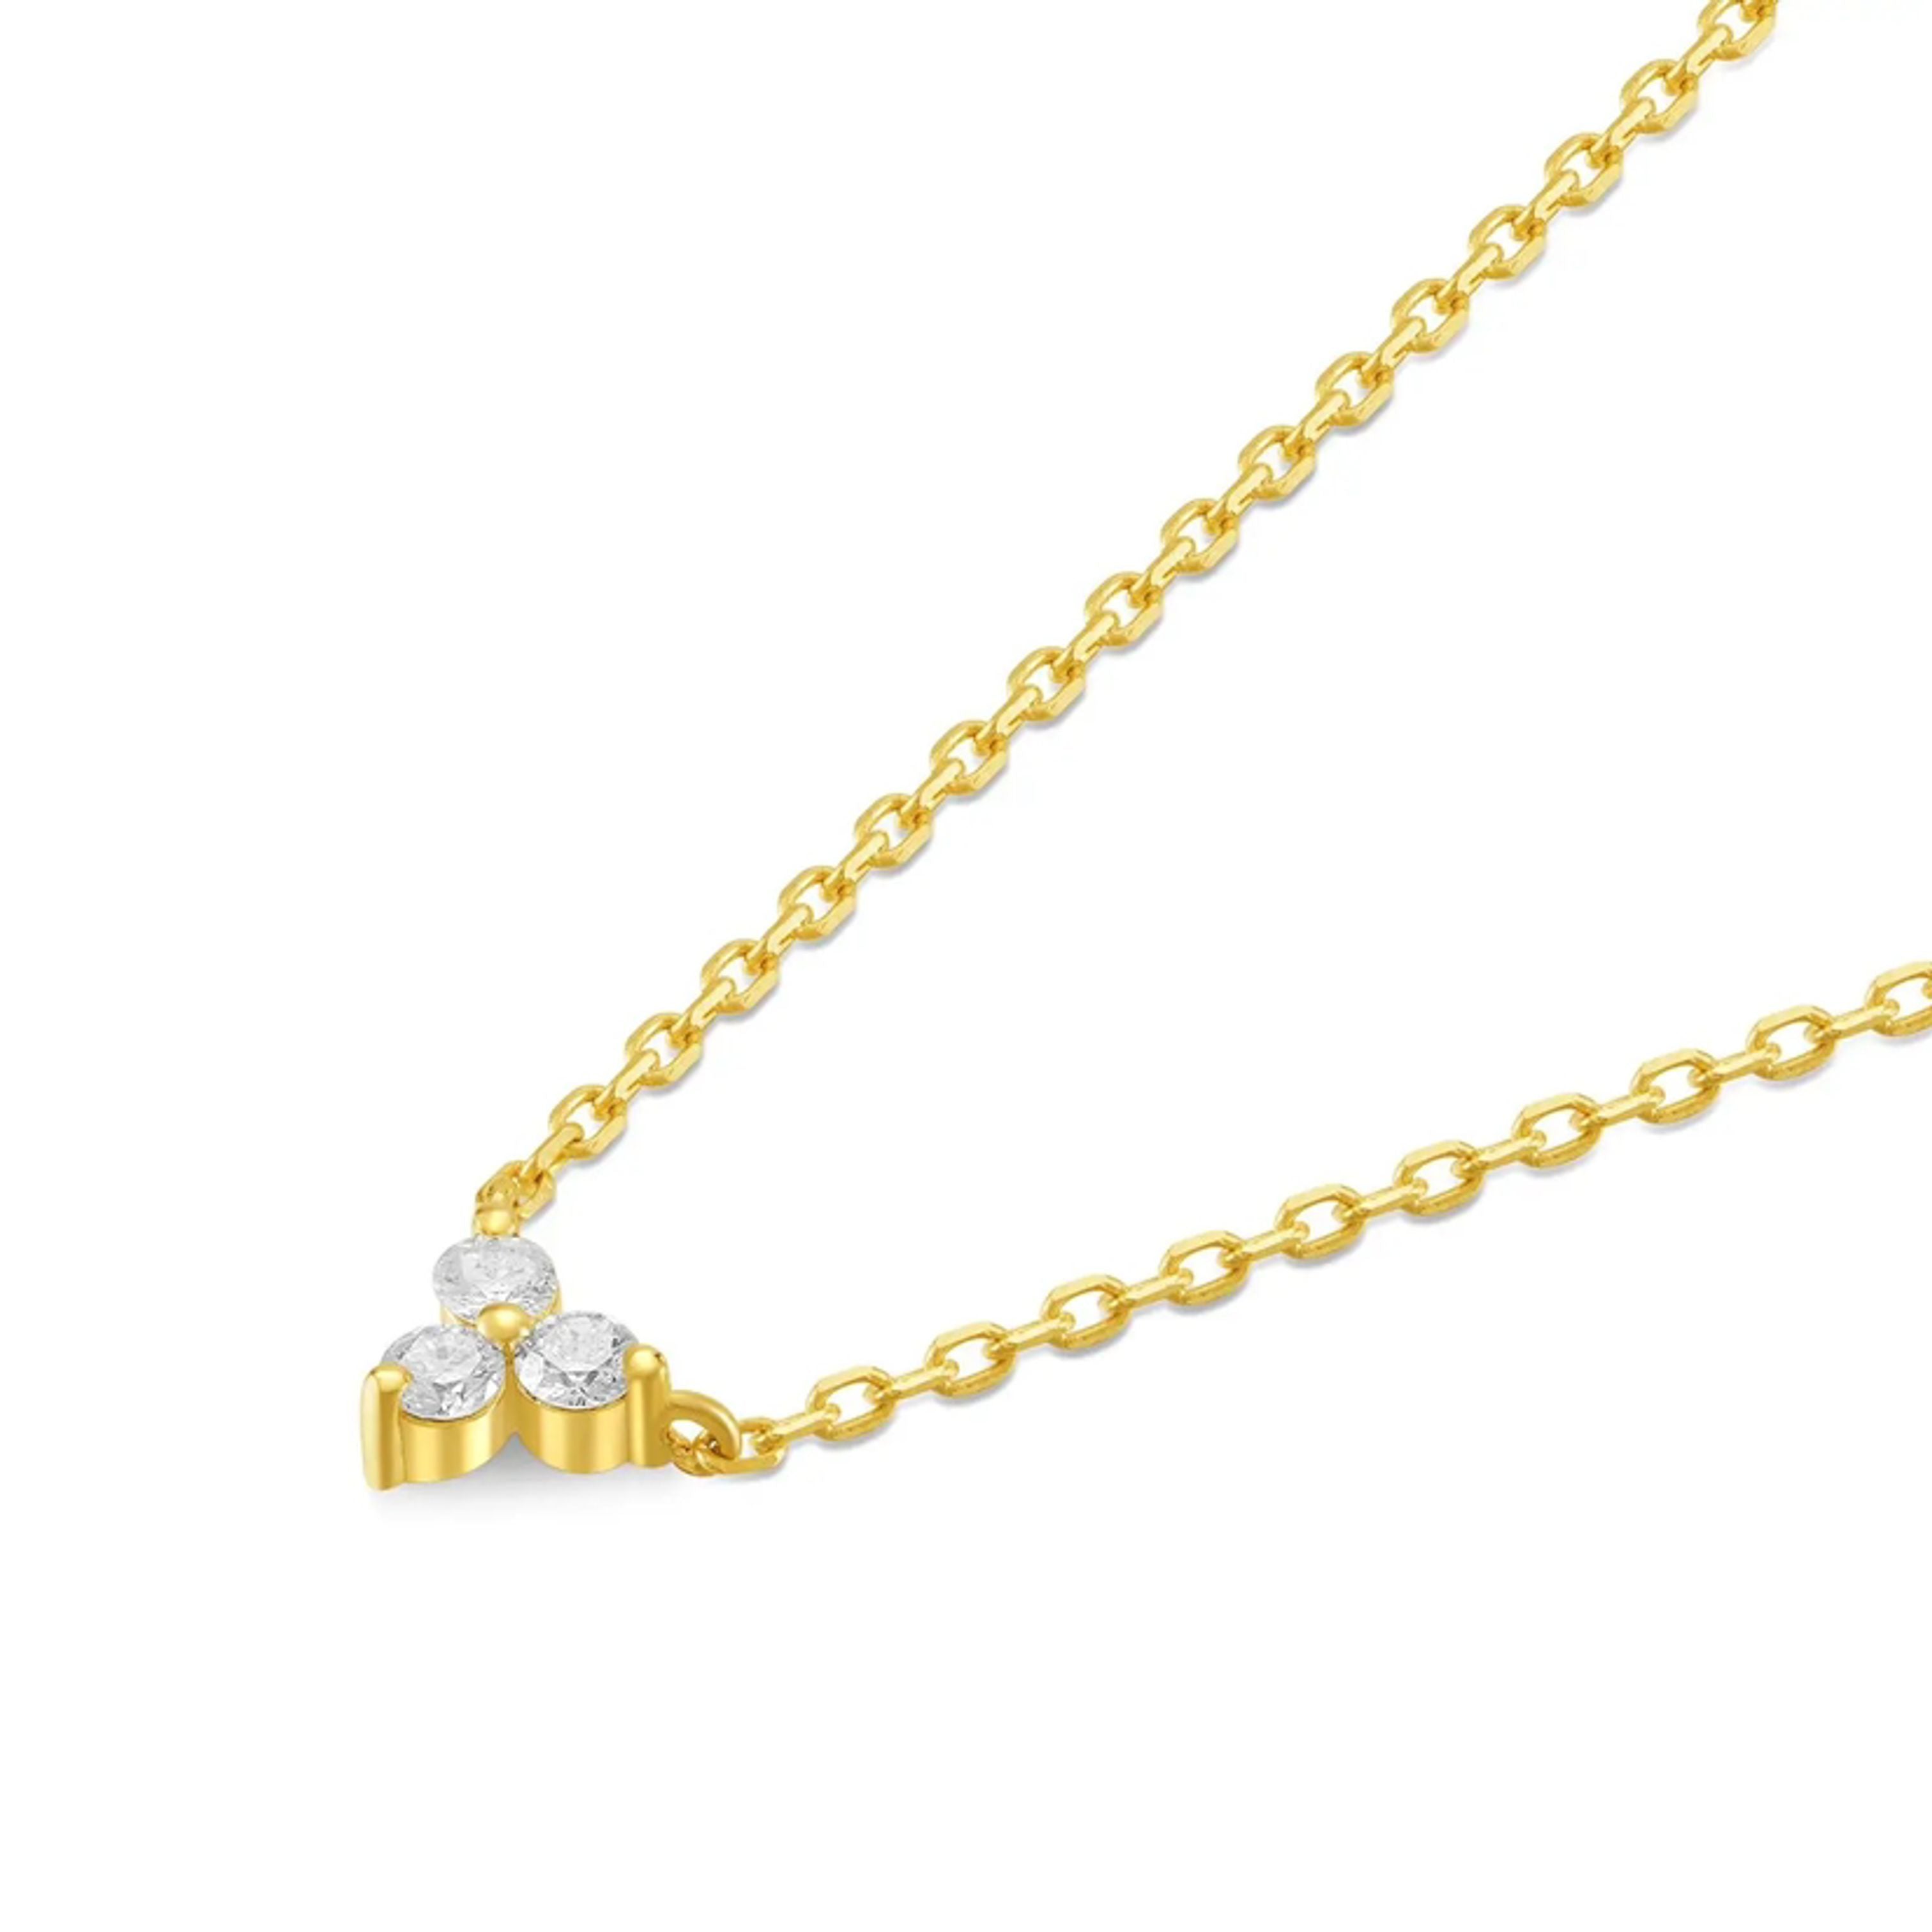 Gabrielle - Luscious Gold Necklace Adorned with Heart Shaped Zirconia Stone